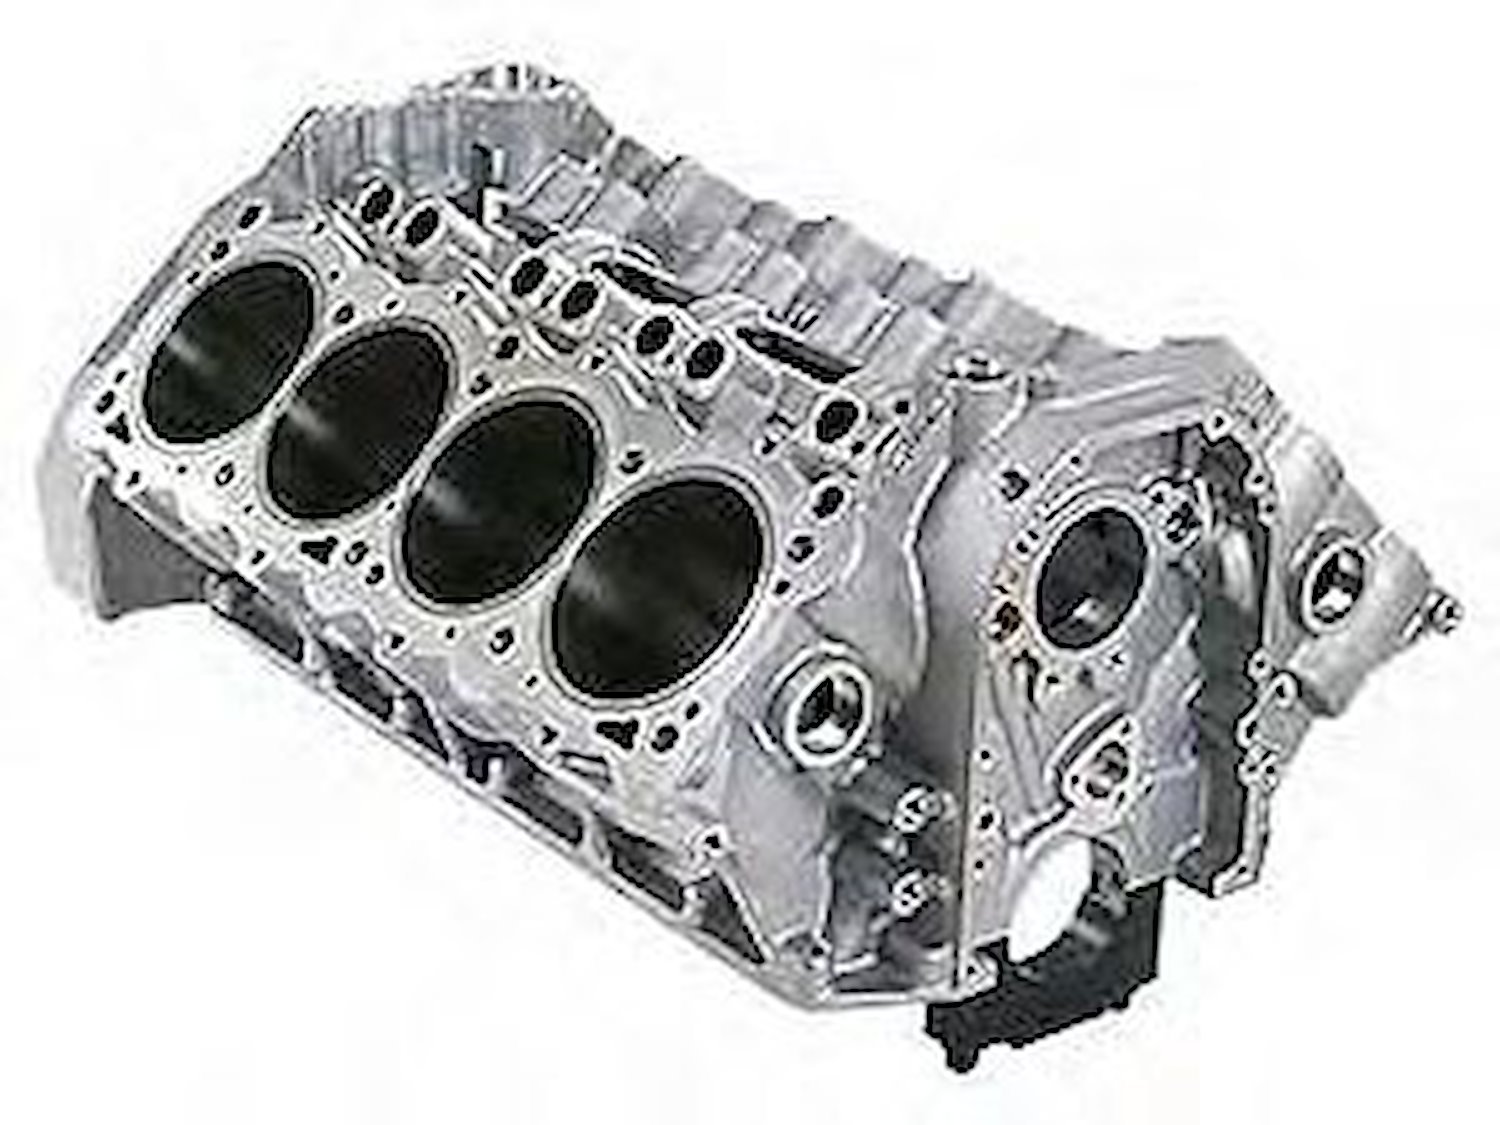 A8 Aluminum Engine Block Fits W9 or W9RP Cylinder Heads